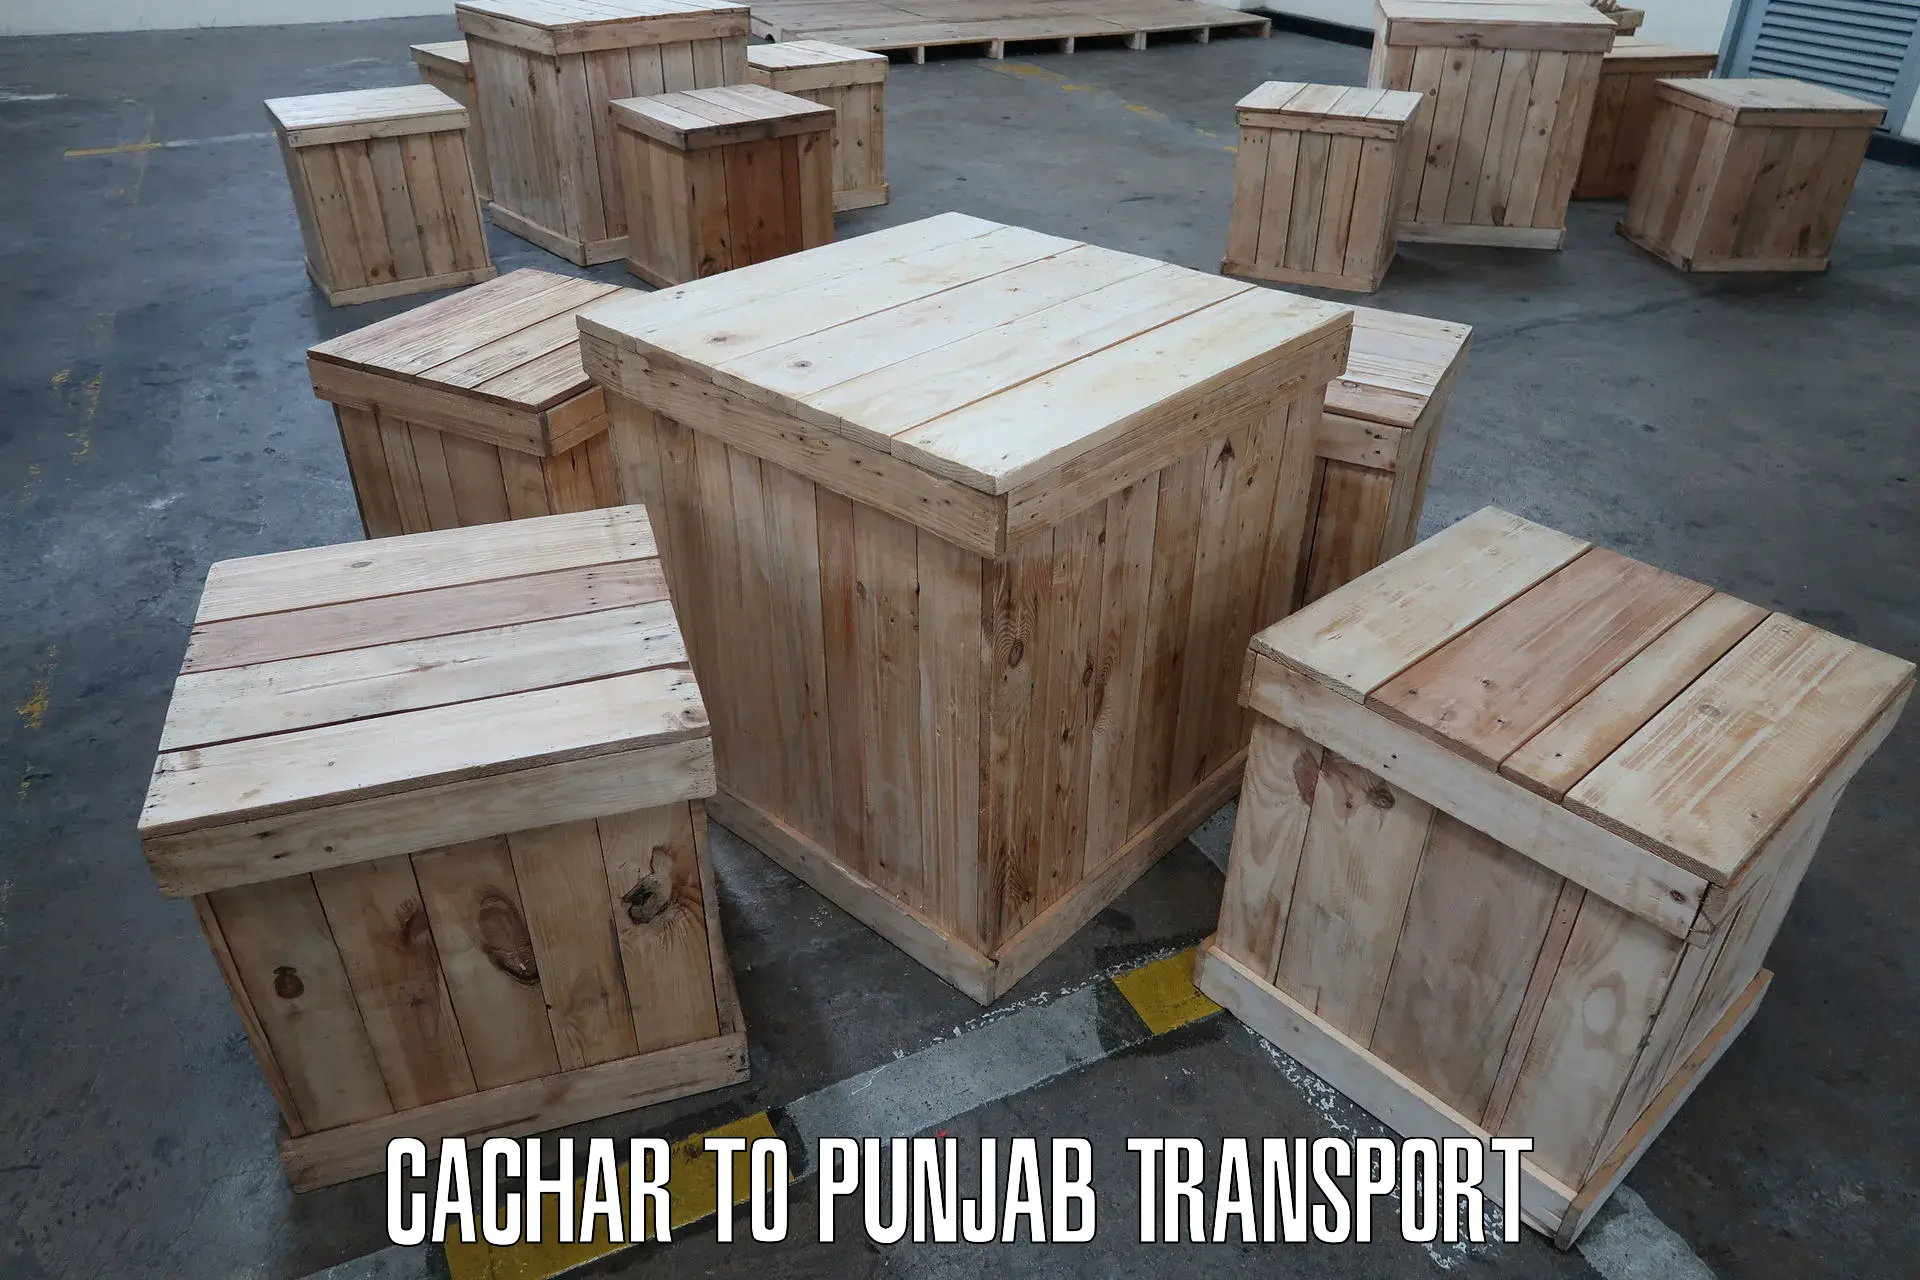 Lorry transport service Cachar to Bagha Purana